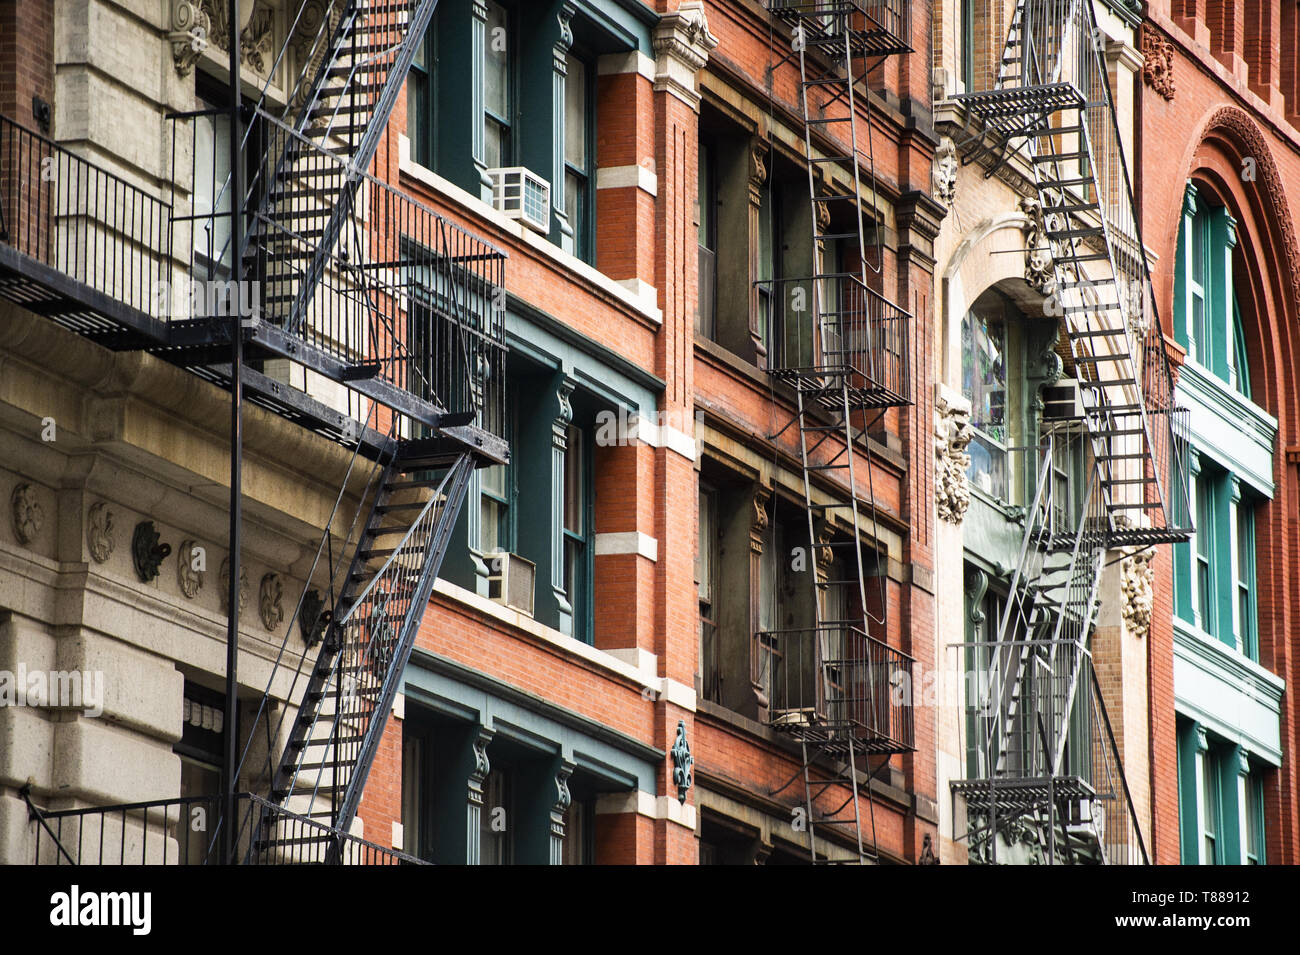 Close-up view of New York City style apartment buildings with emergency stairs along Mott Street in Chinatown neighborhood of Manhattan, New York, USA Stock Photo